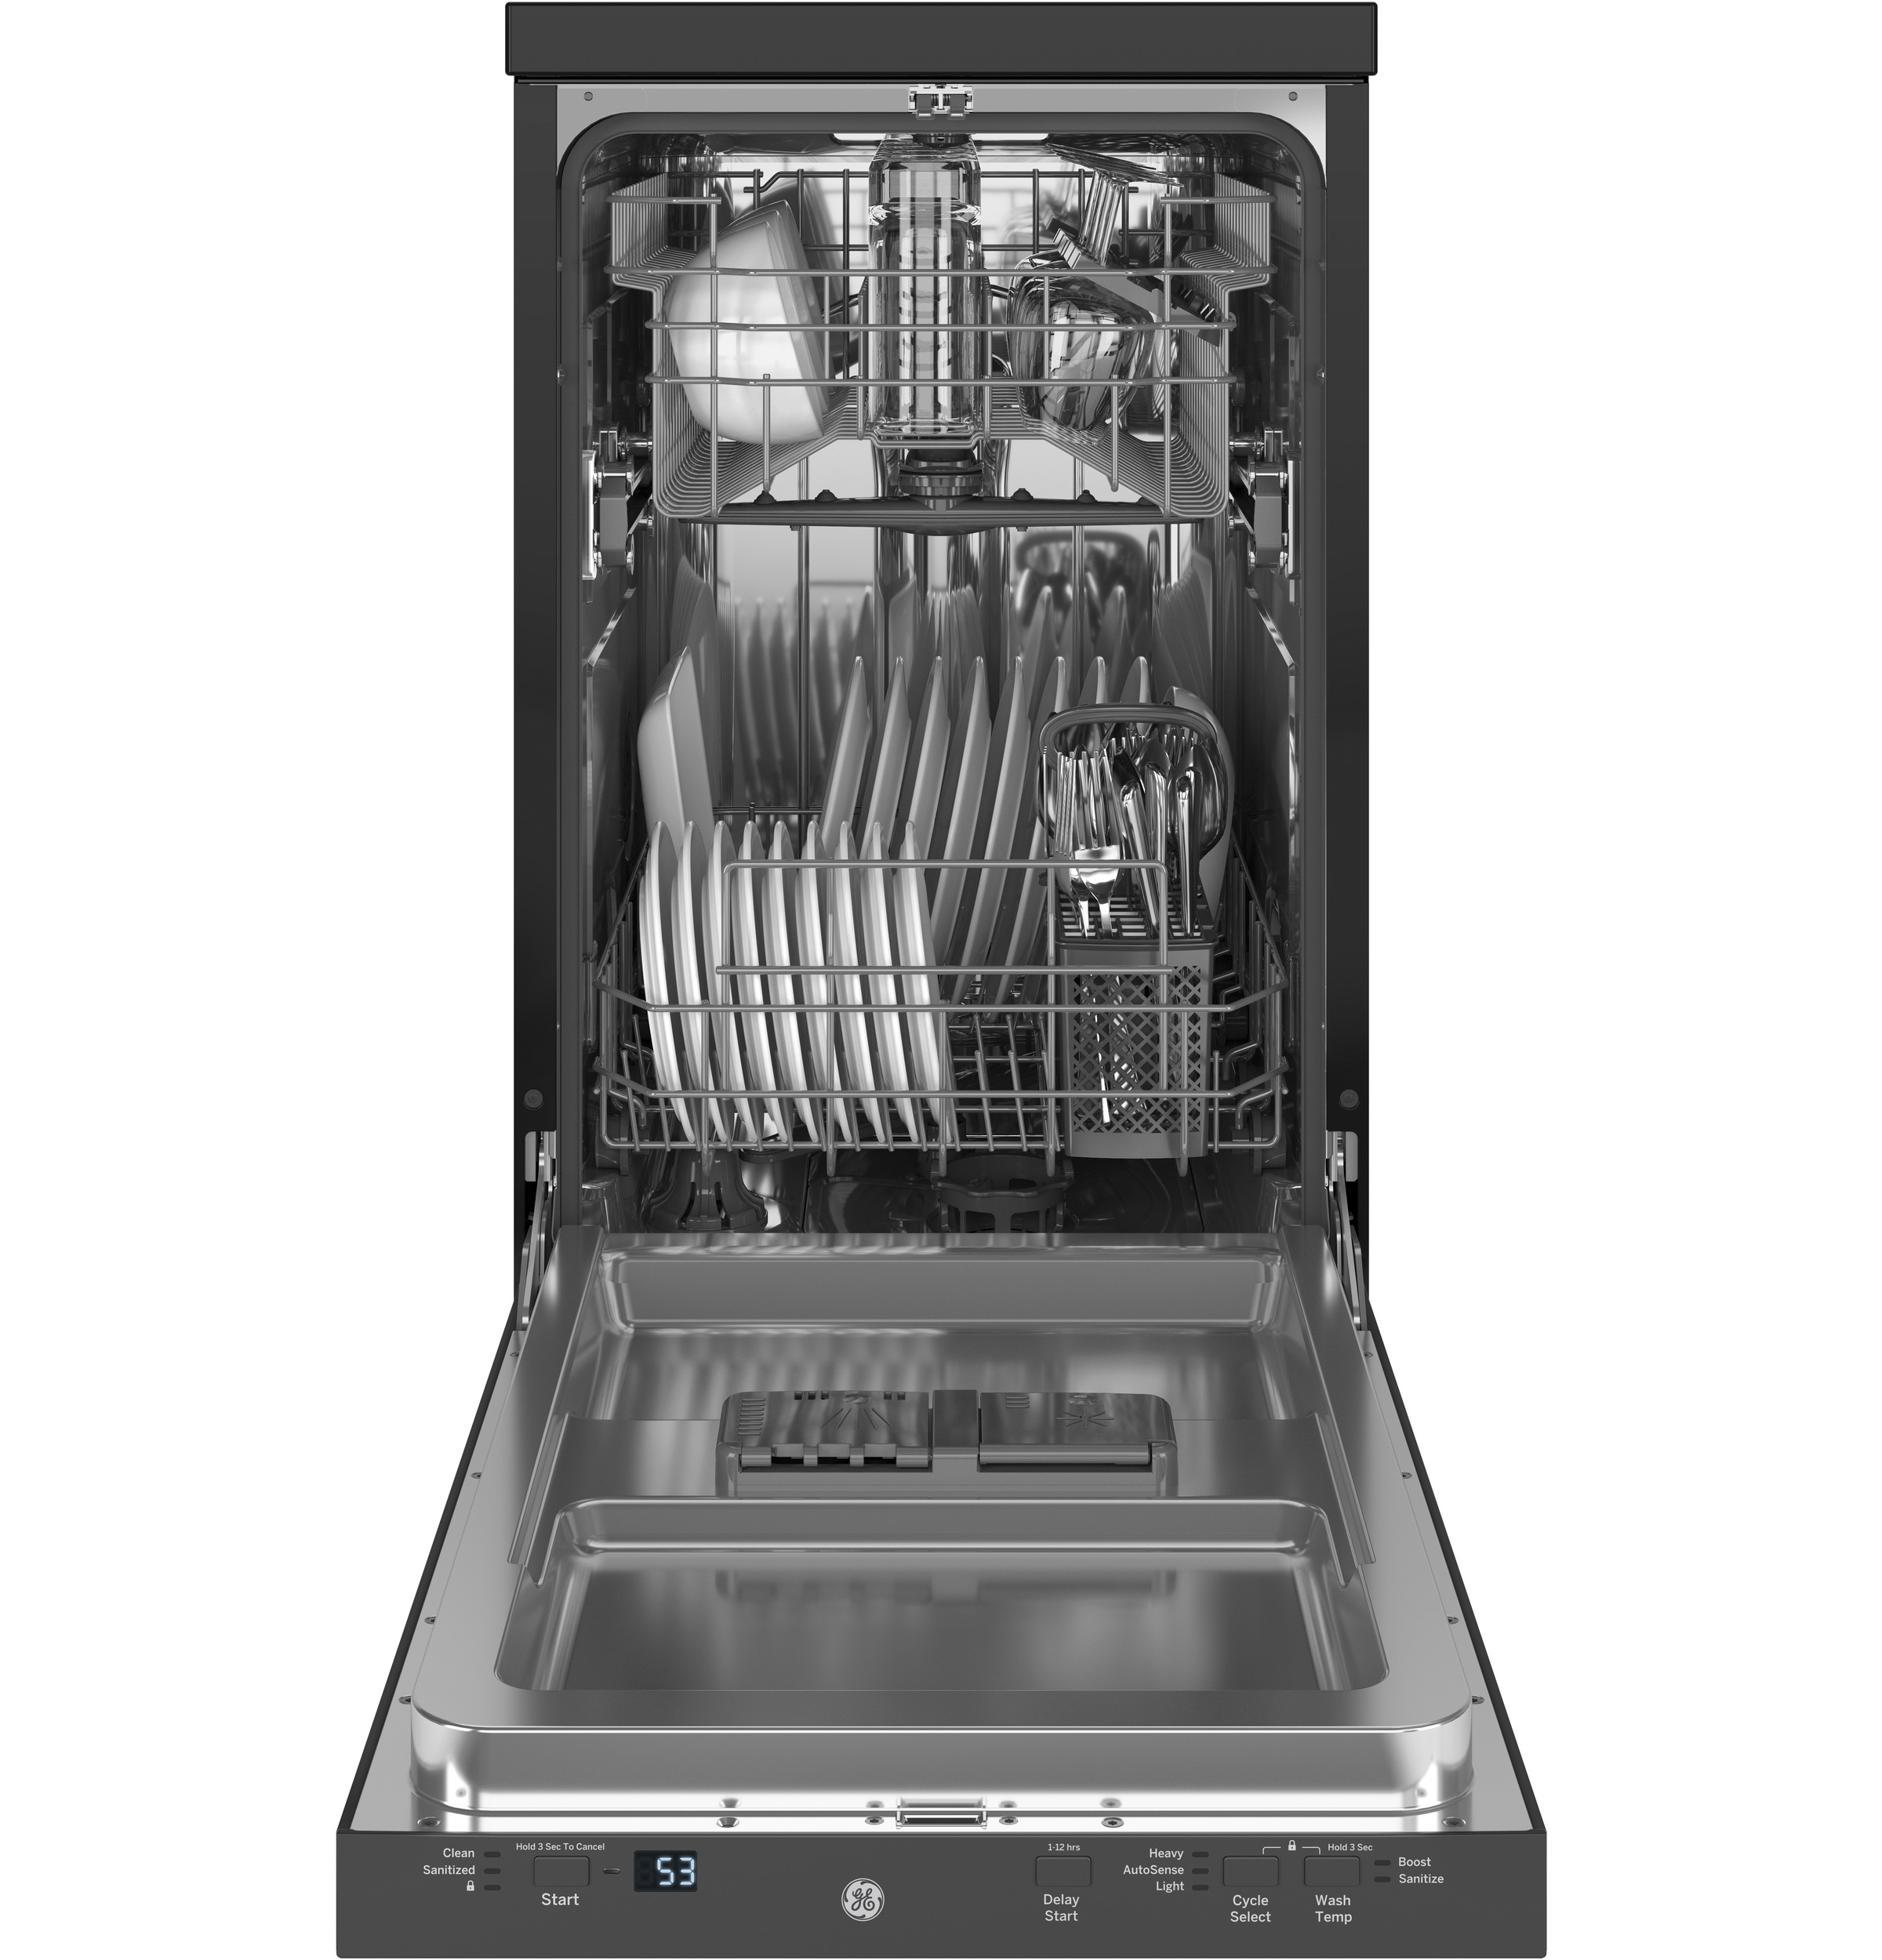 stainless steel portable dishwasher